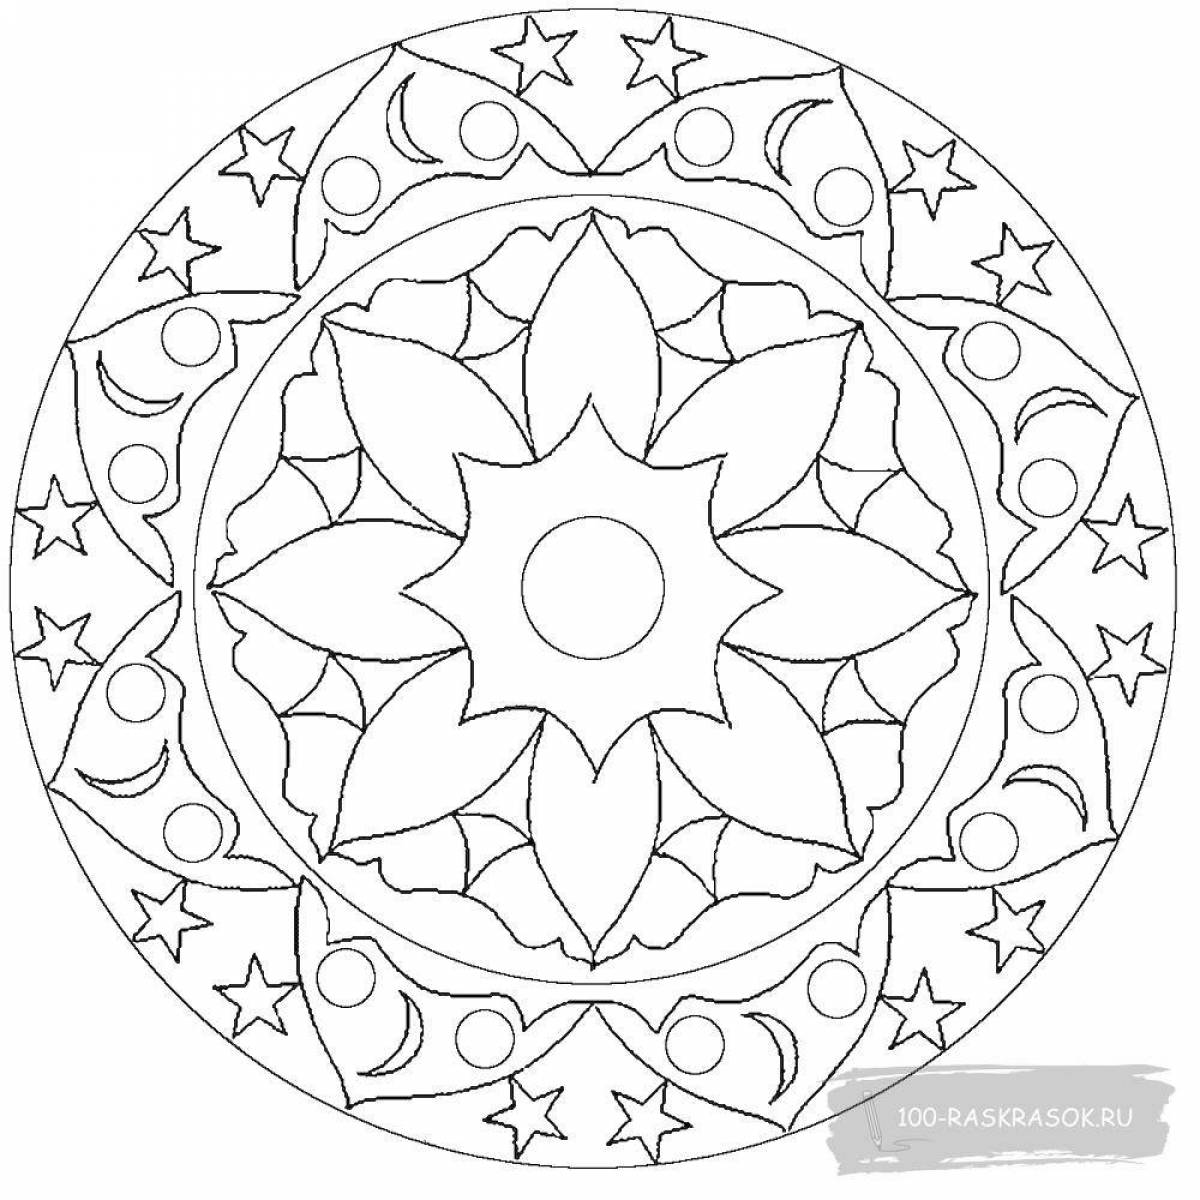 Shining ornament coloring page